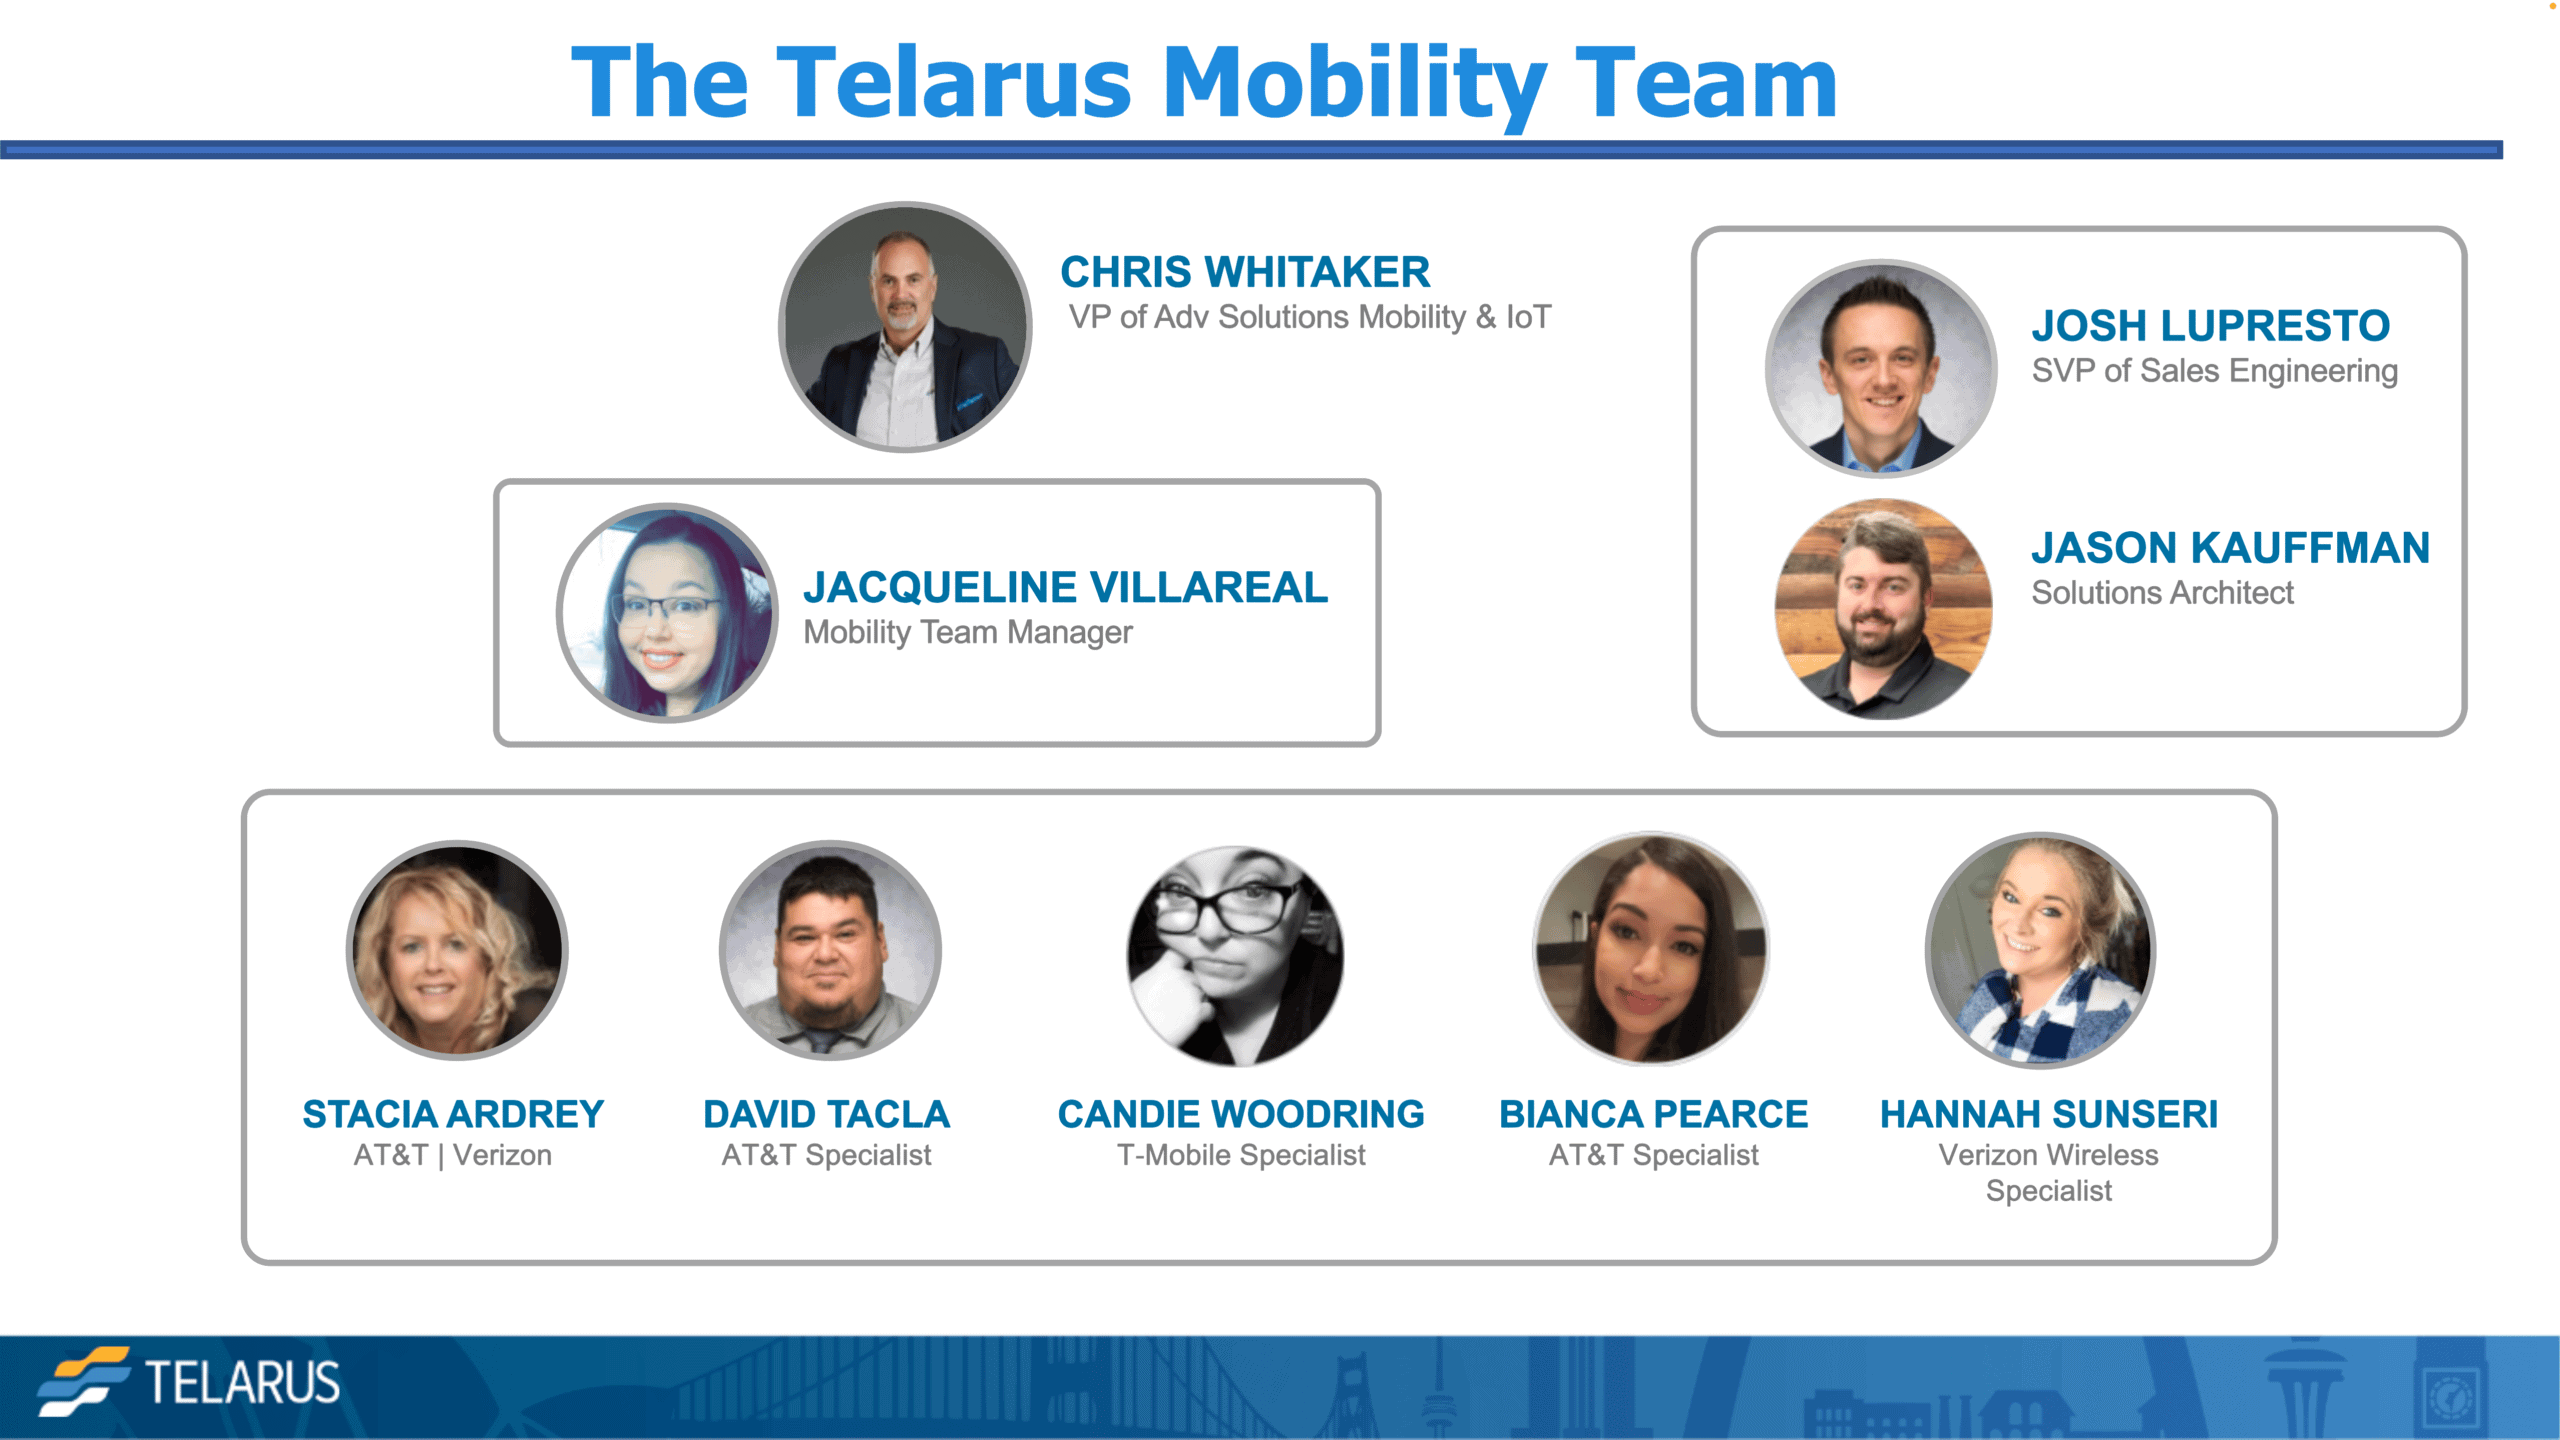 Graphic showing Telarus Mobility Team members